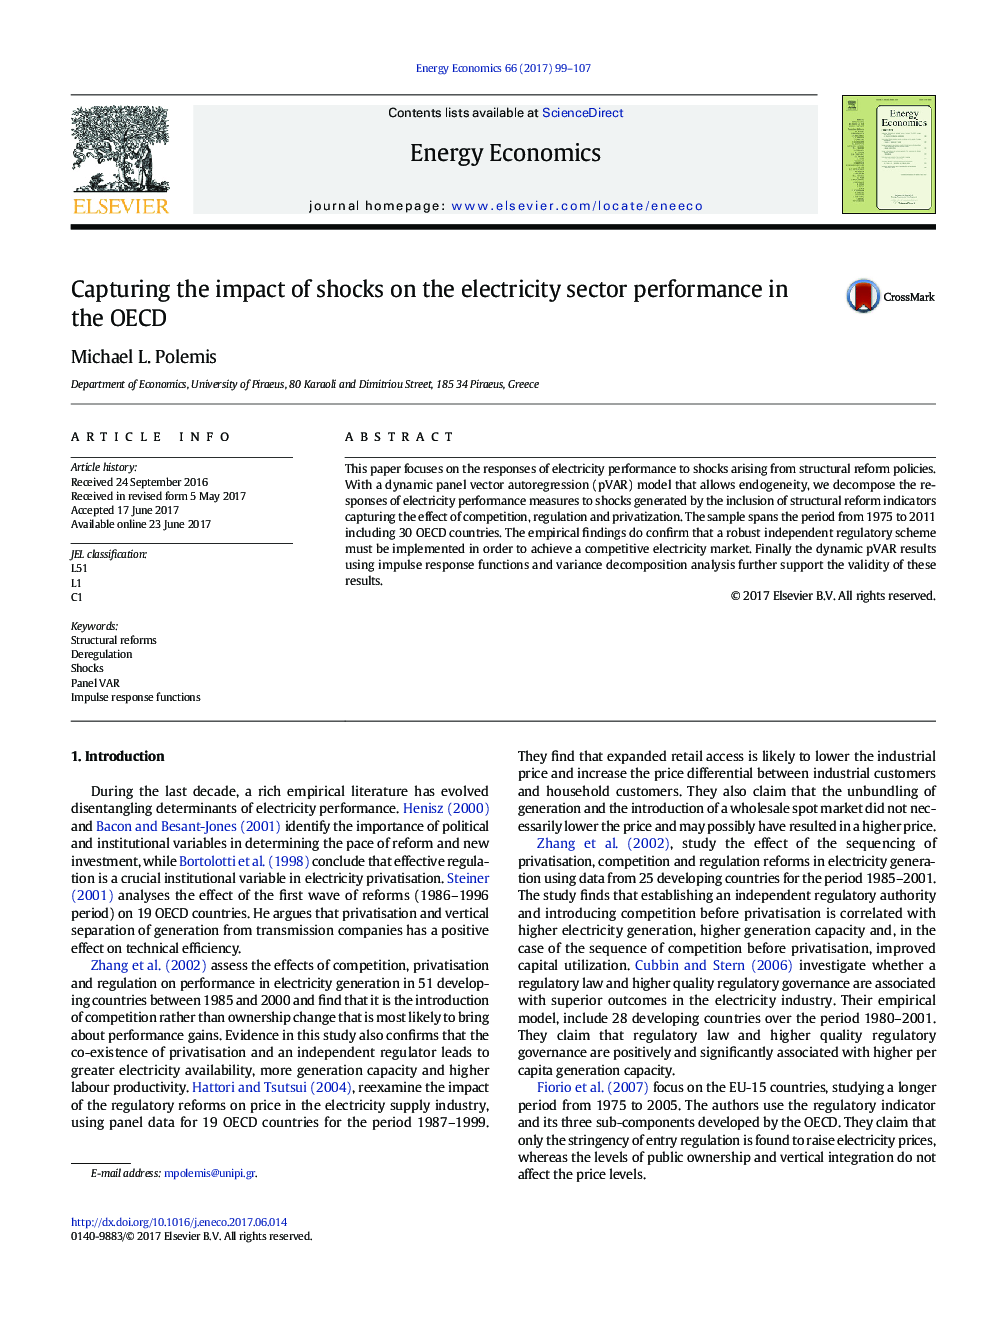 Capturing the impact of shocks on the electricity sector performance in the OECD